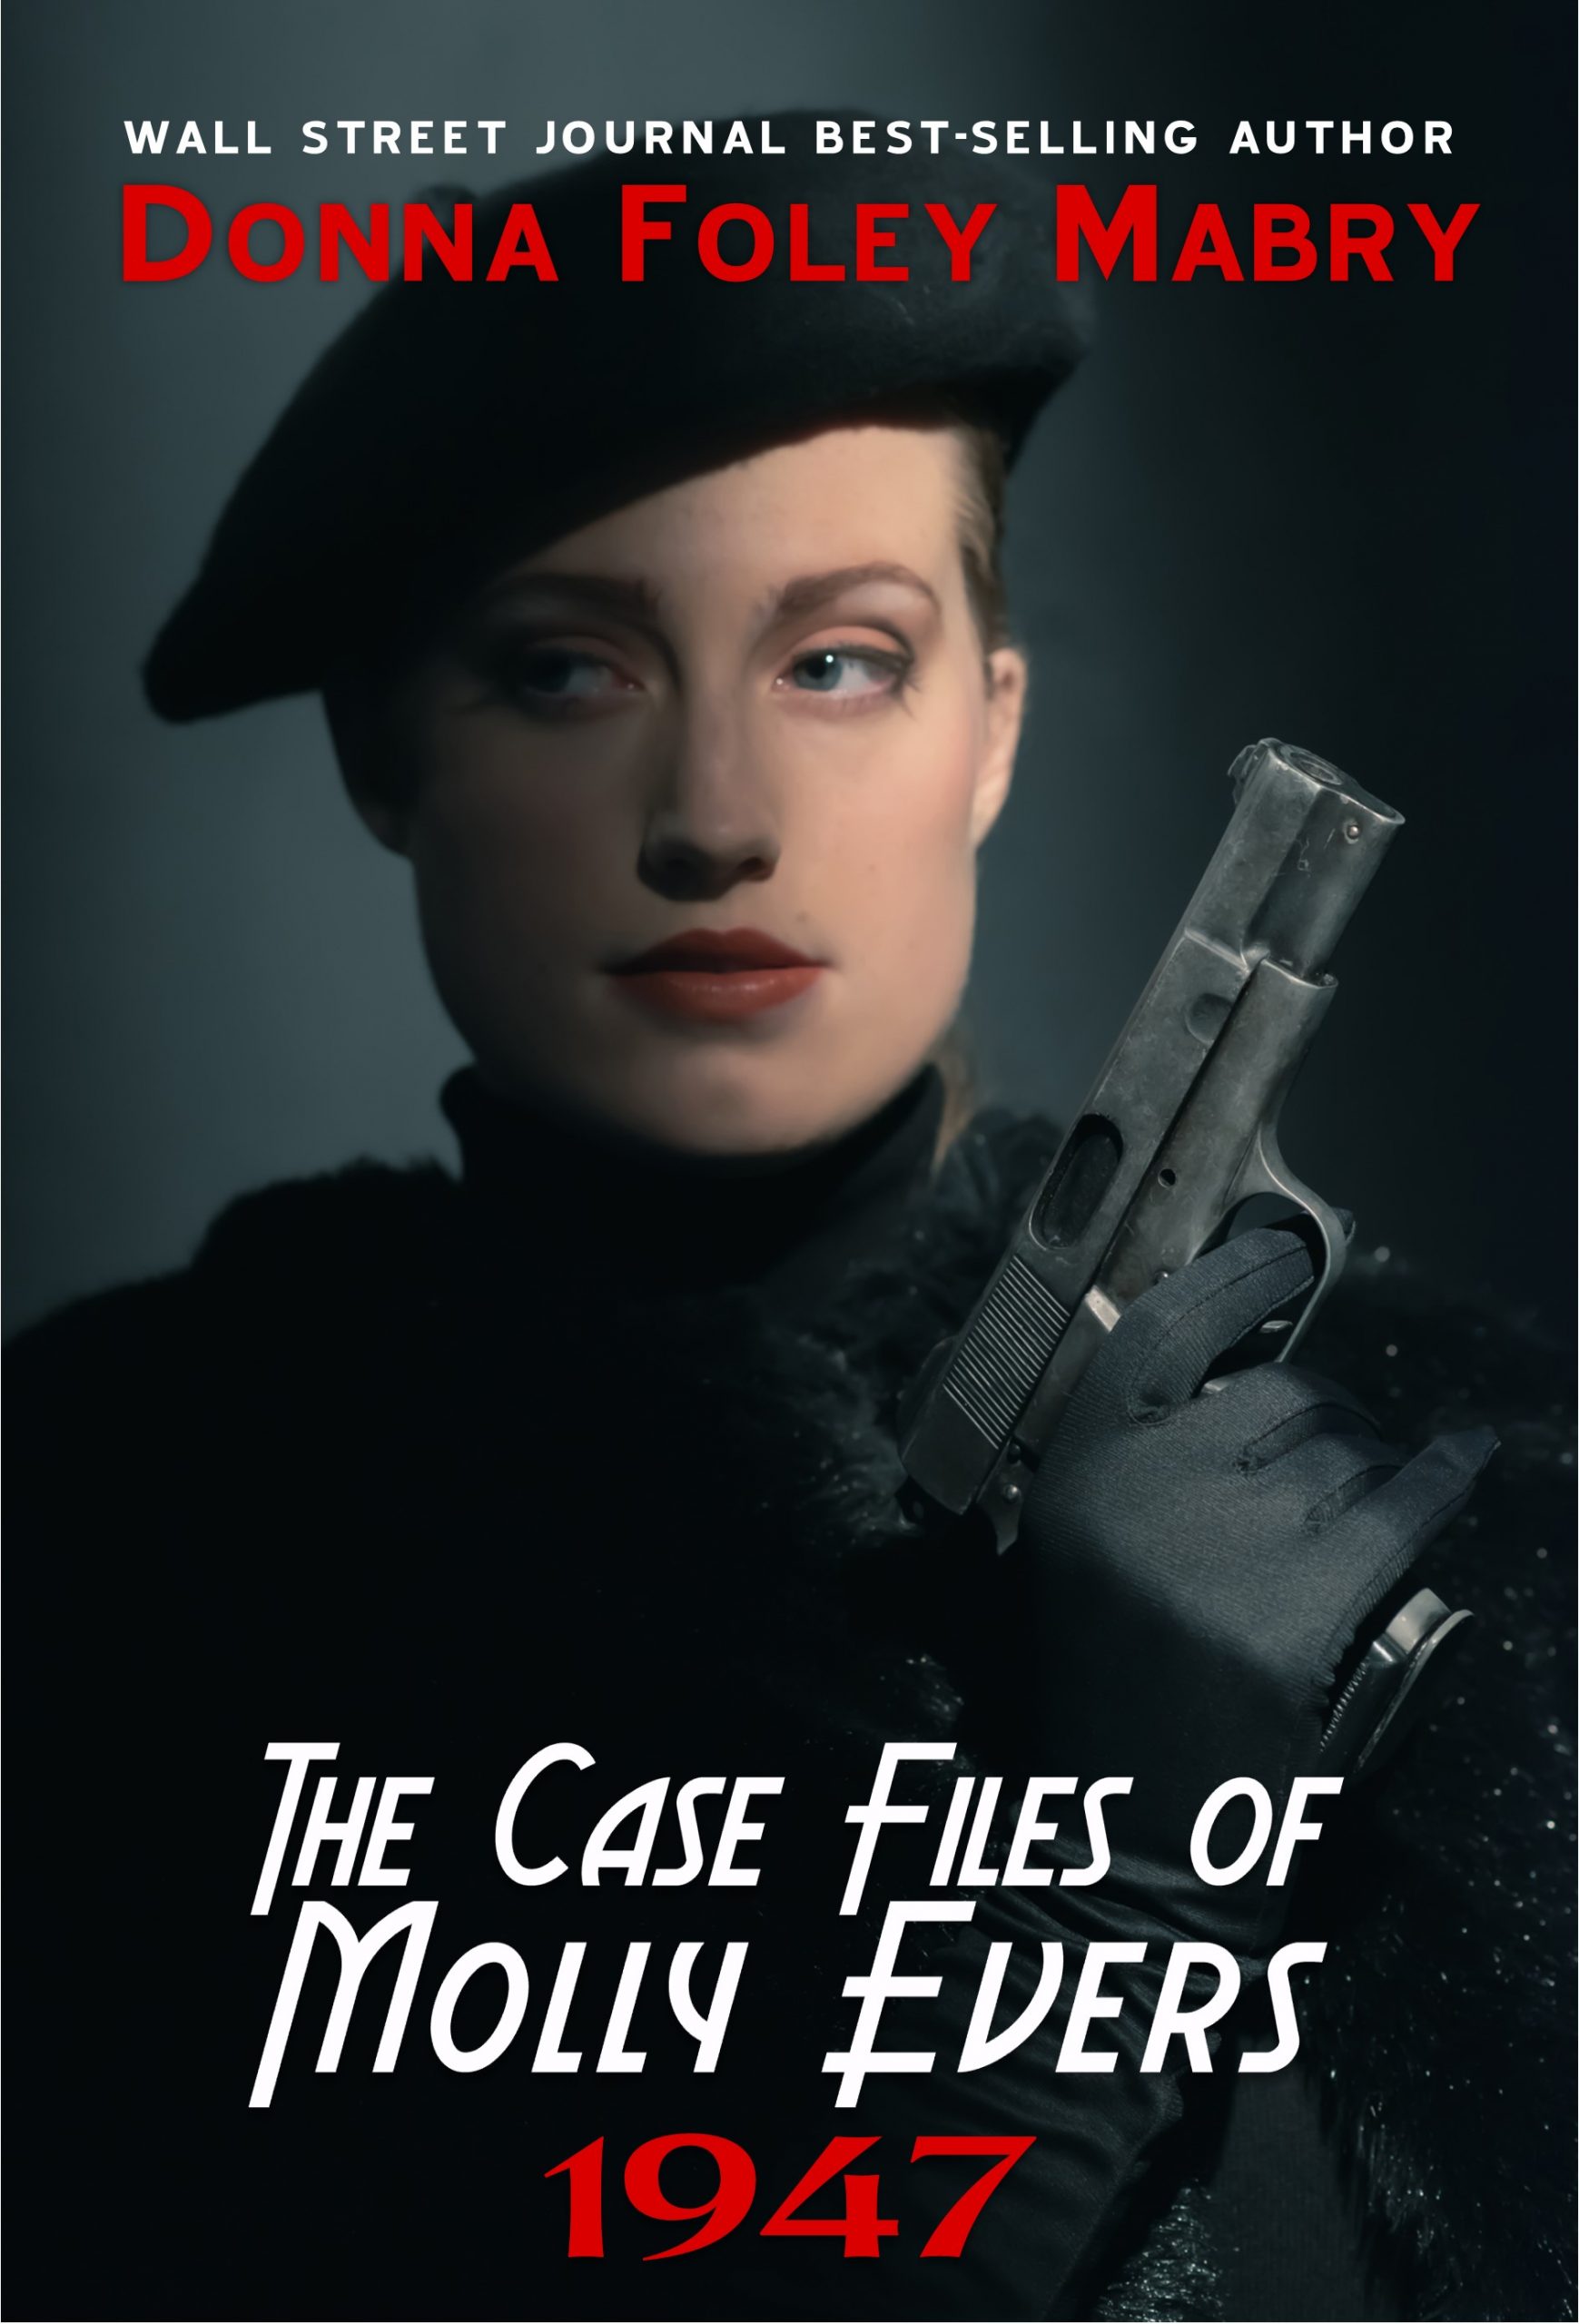 The Case Files of Molly Evers - 1947